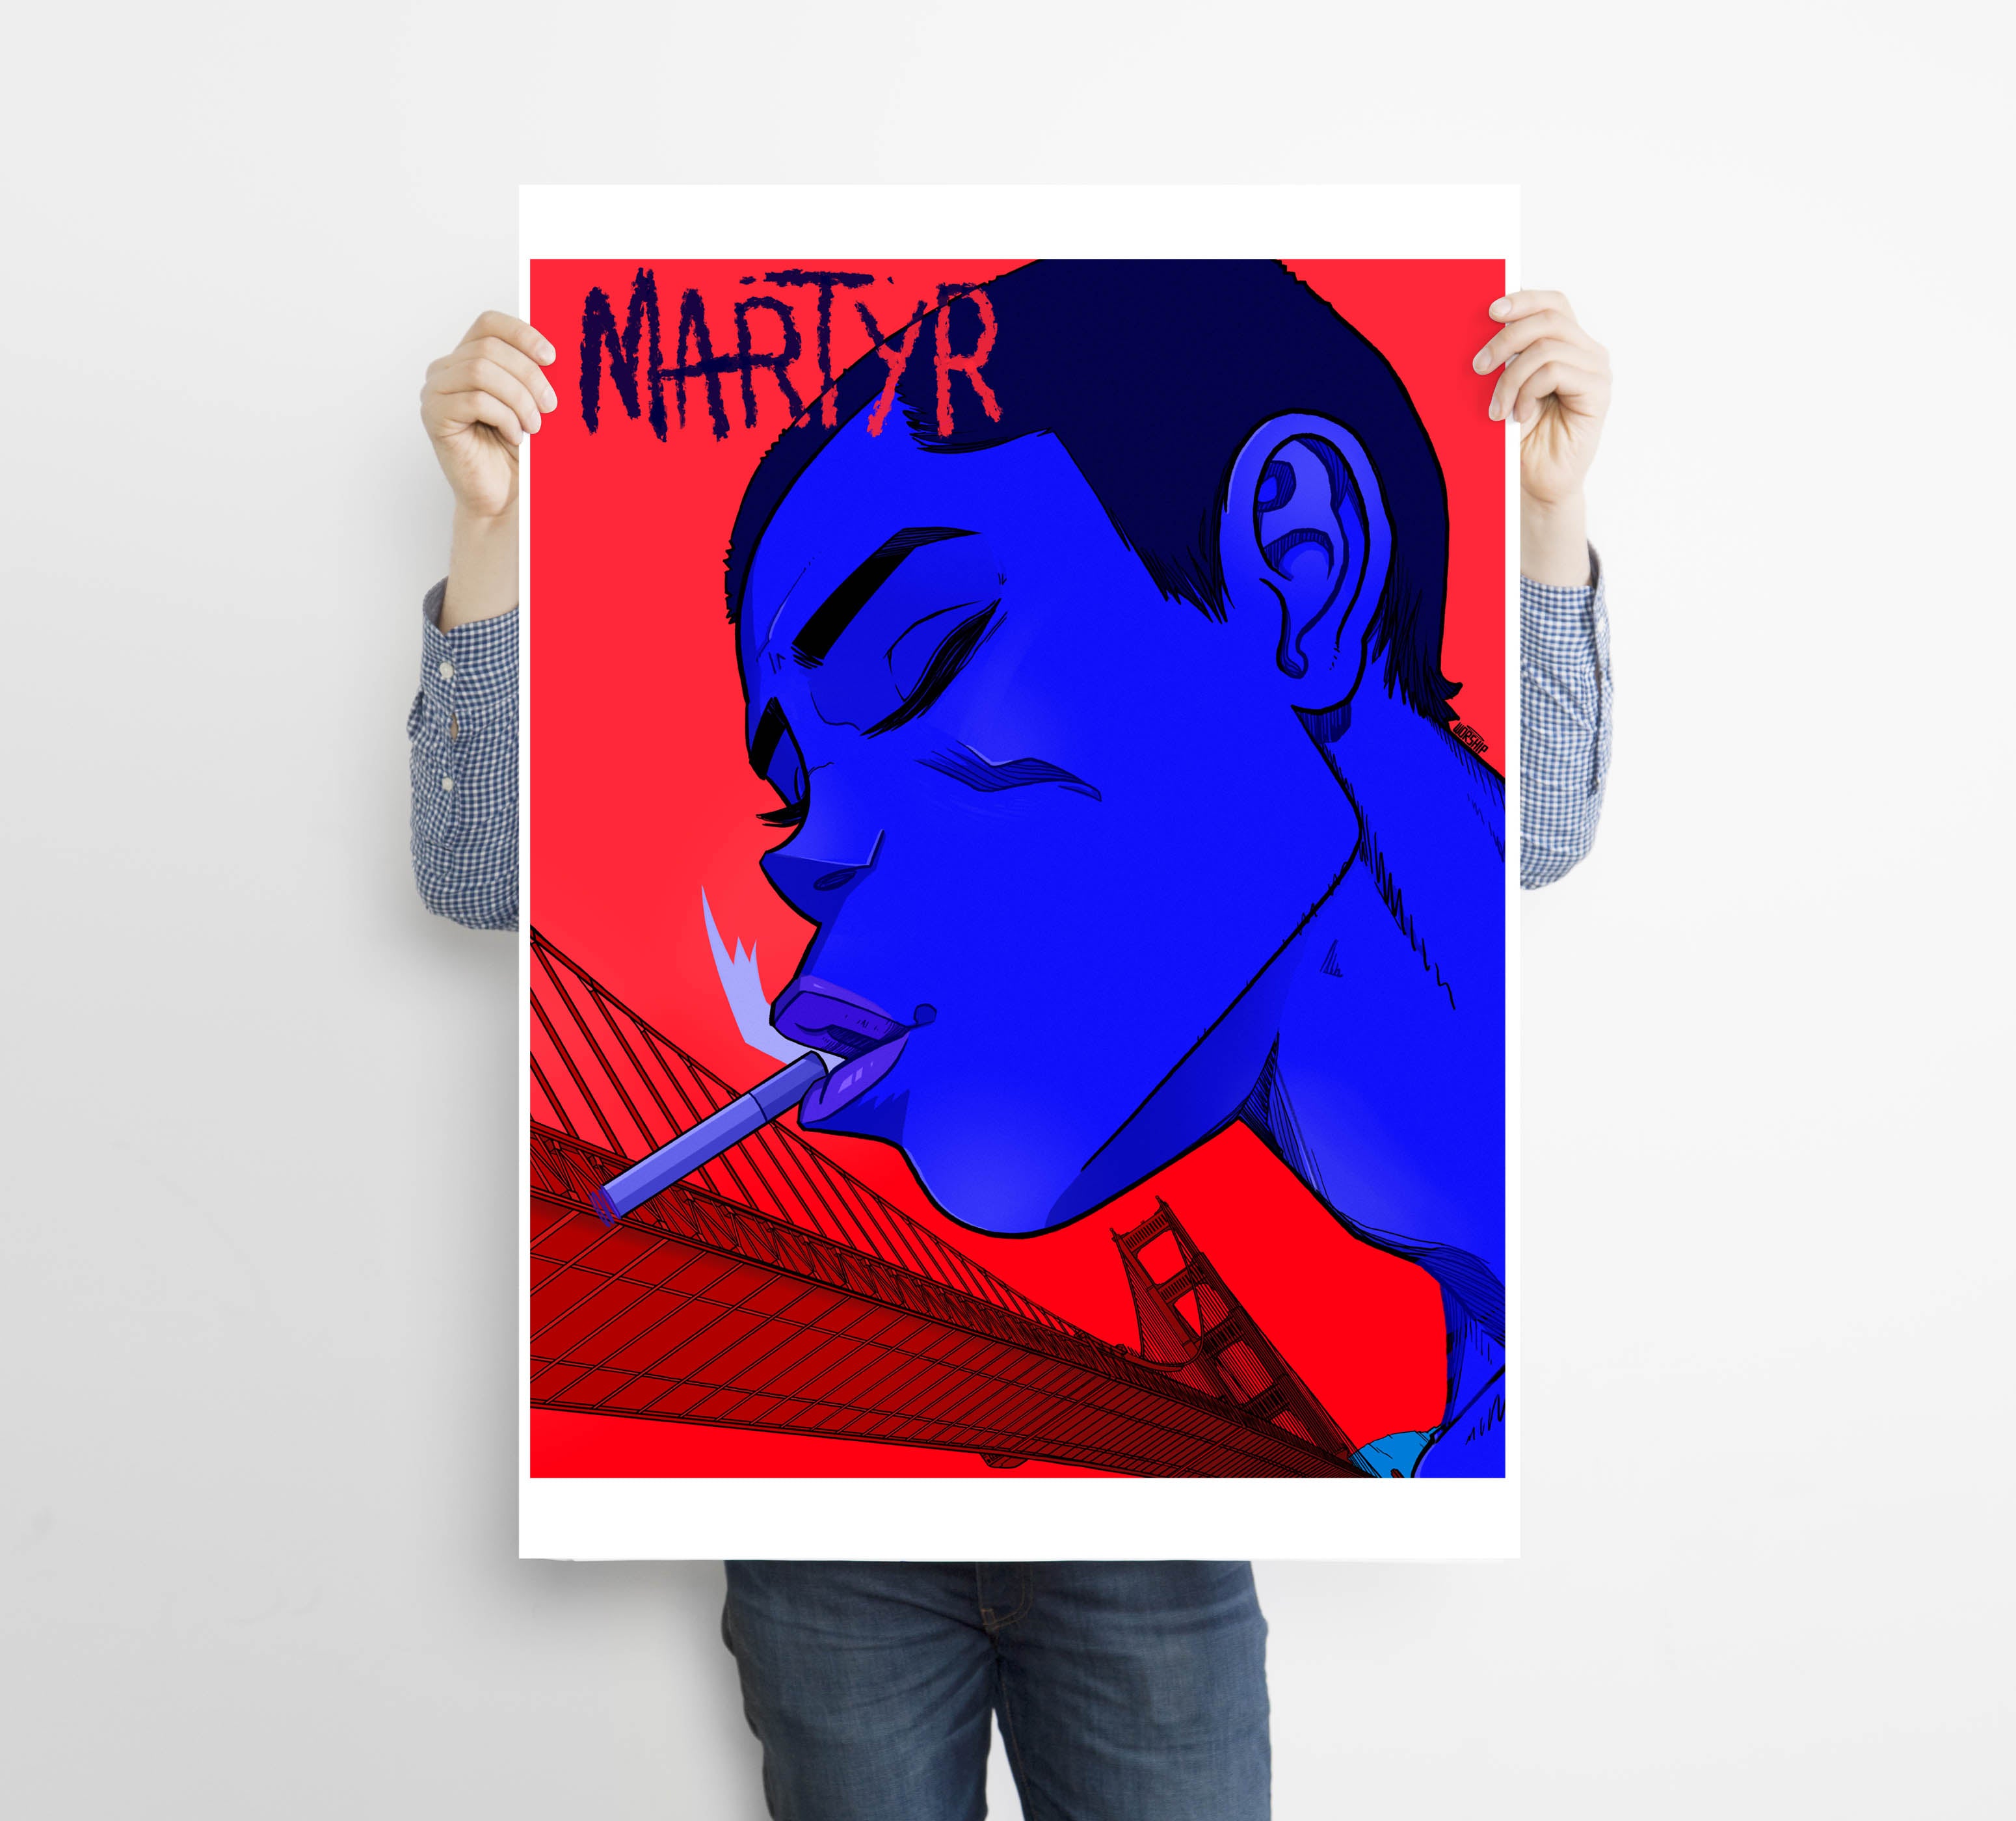 Unique and cool Gorillaz-style Martyr poster/wall art illustration